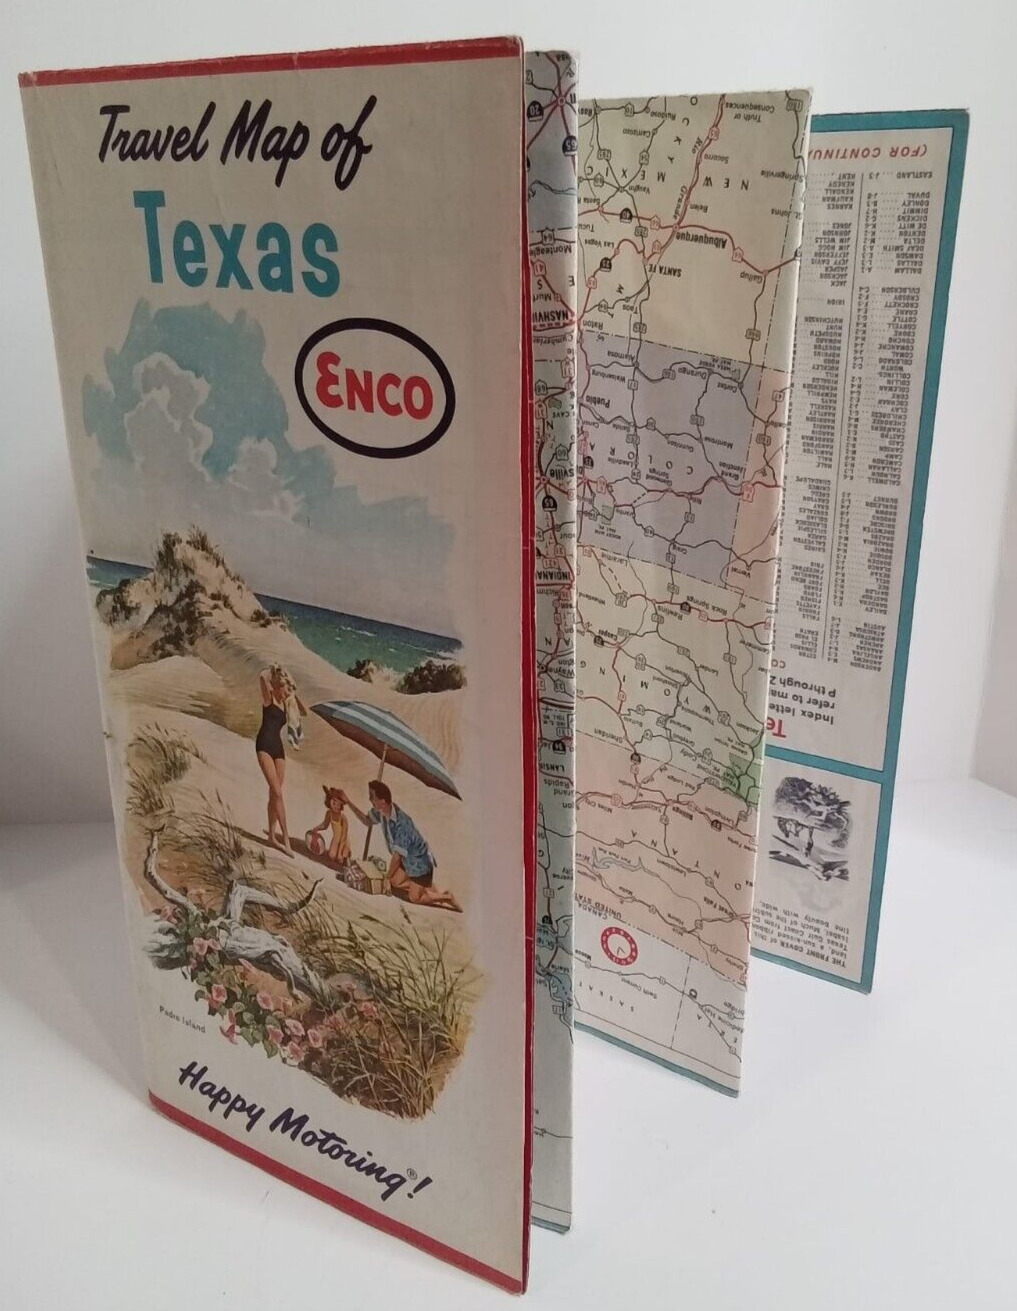 VTG 1963 Enco Travel Map of Texas - Great Condition